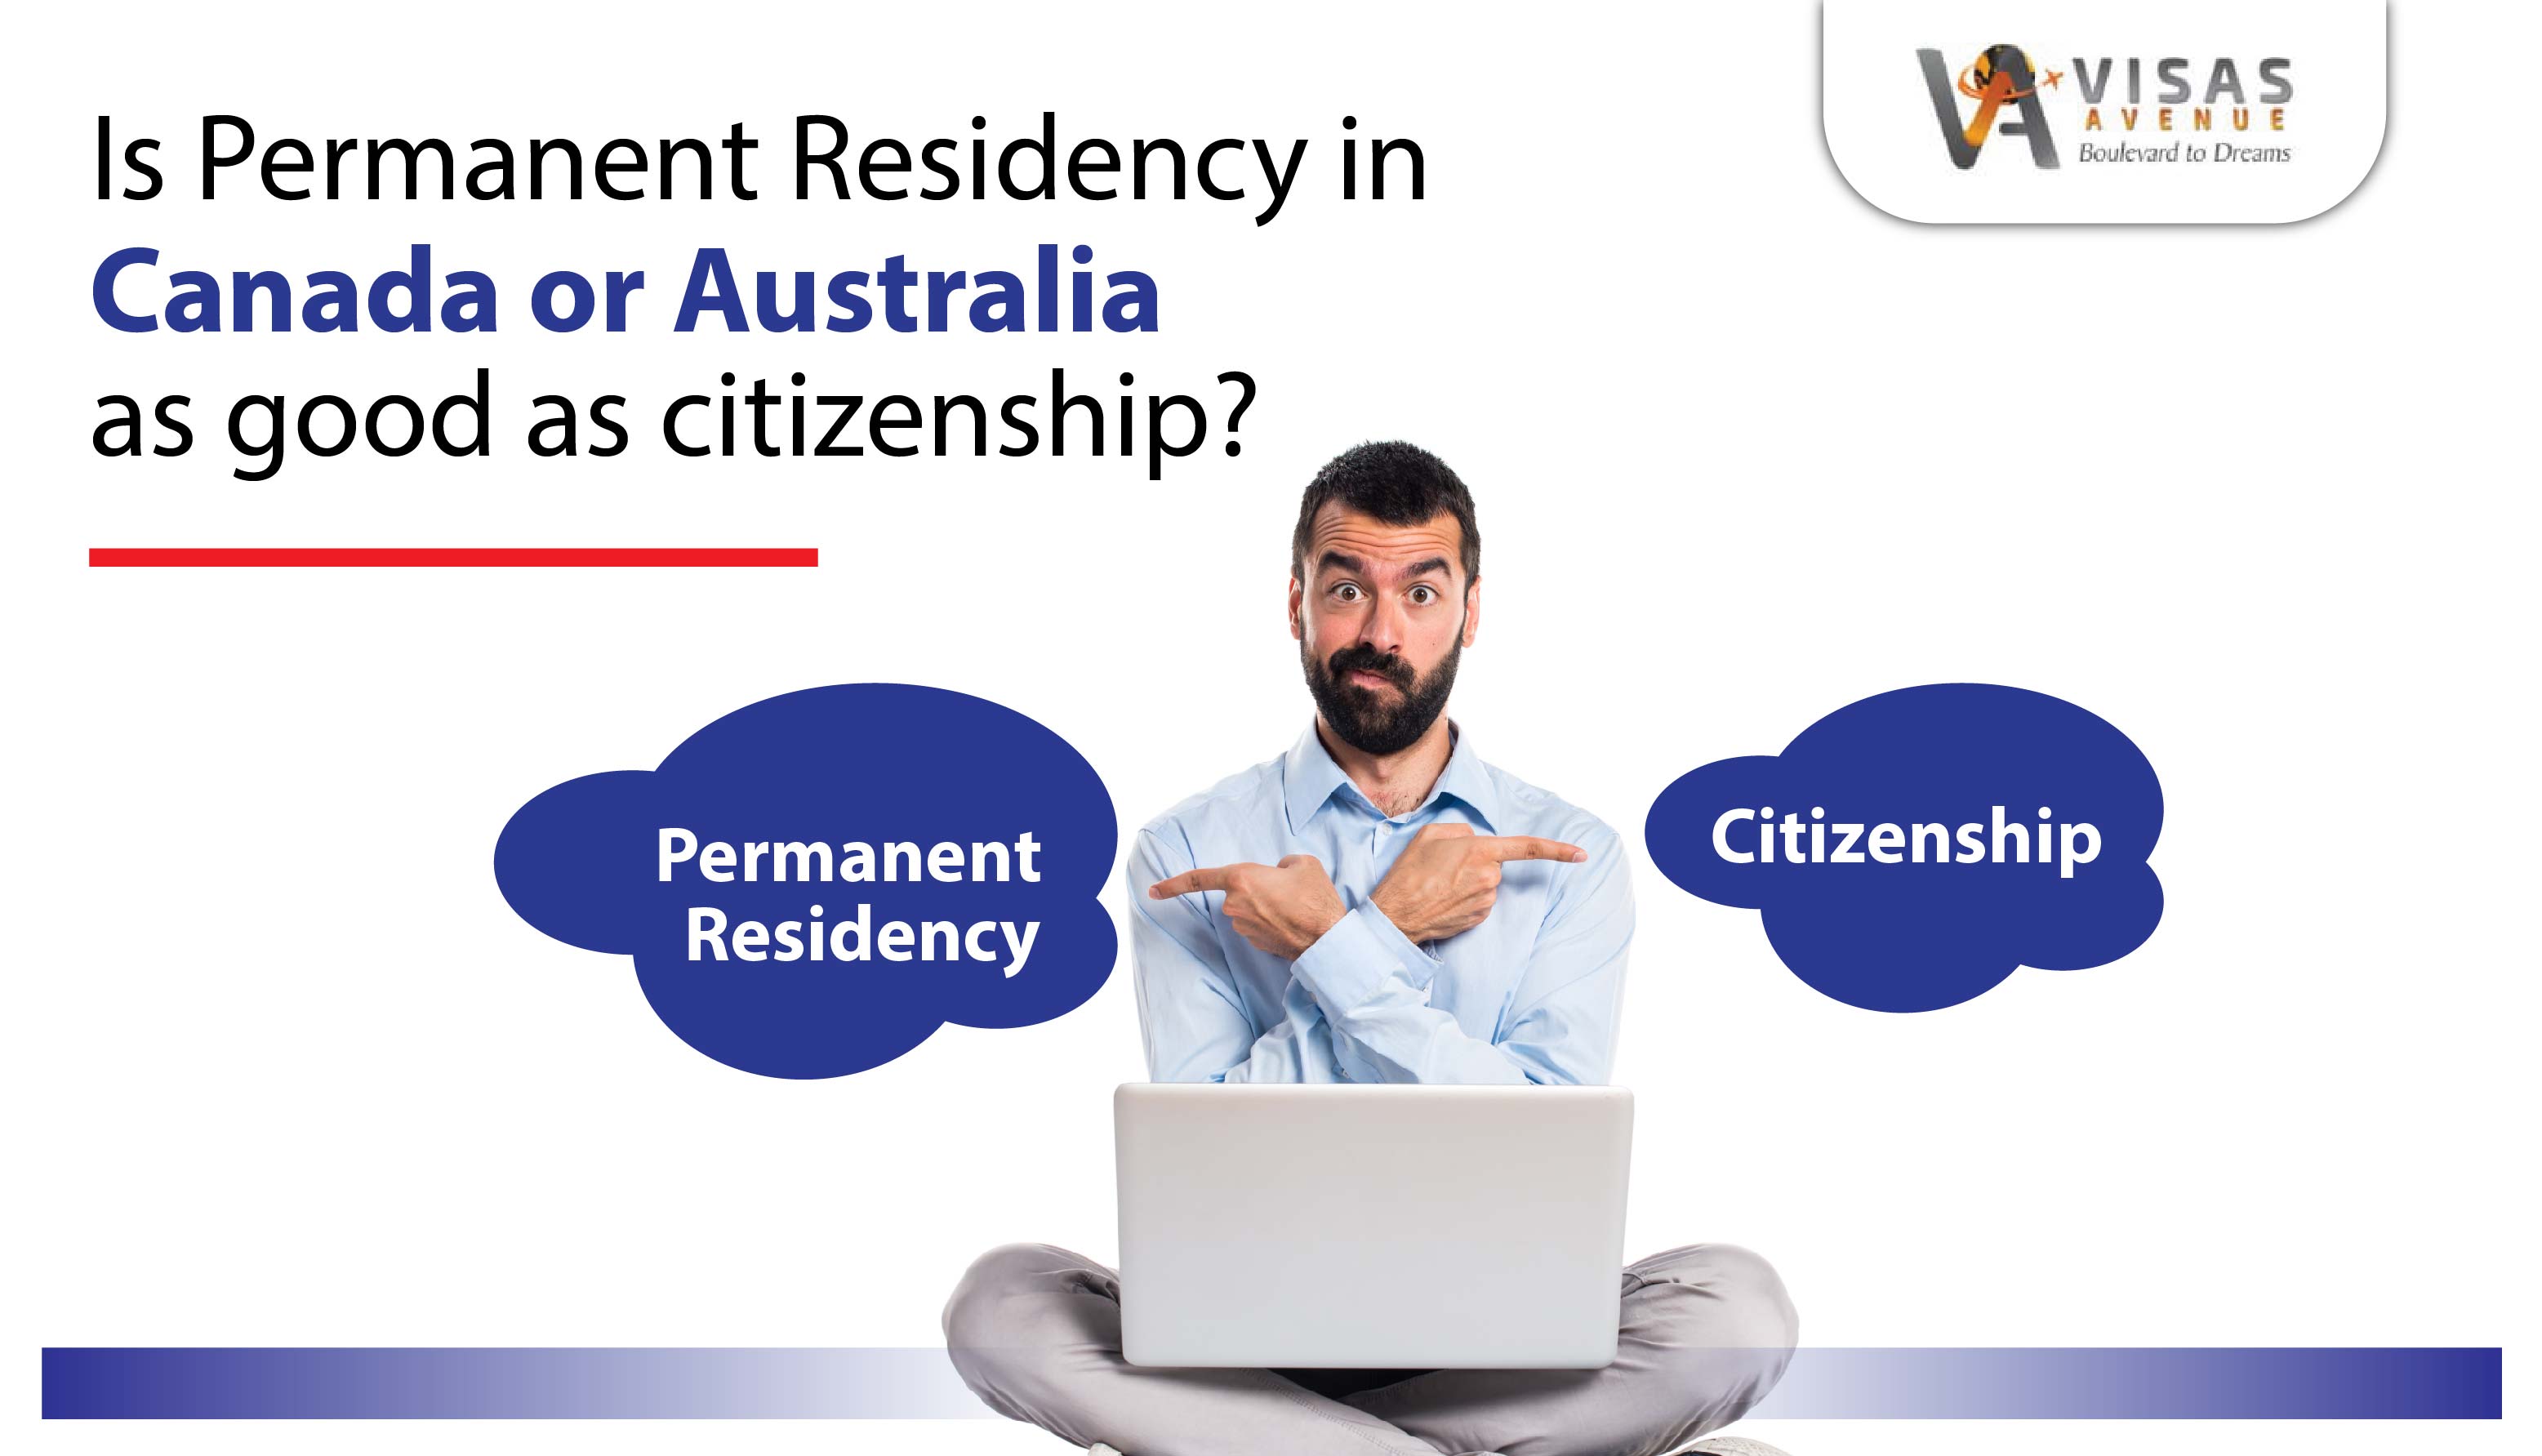 Is Permanent Residency in Canada or Australia as Good as Citizenship?